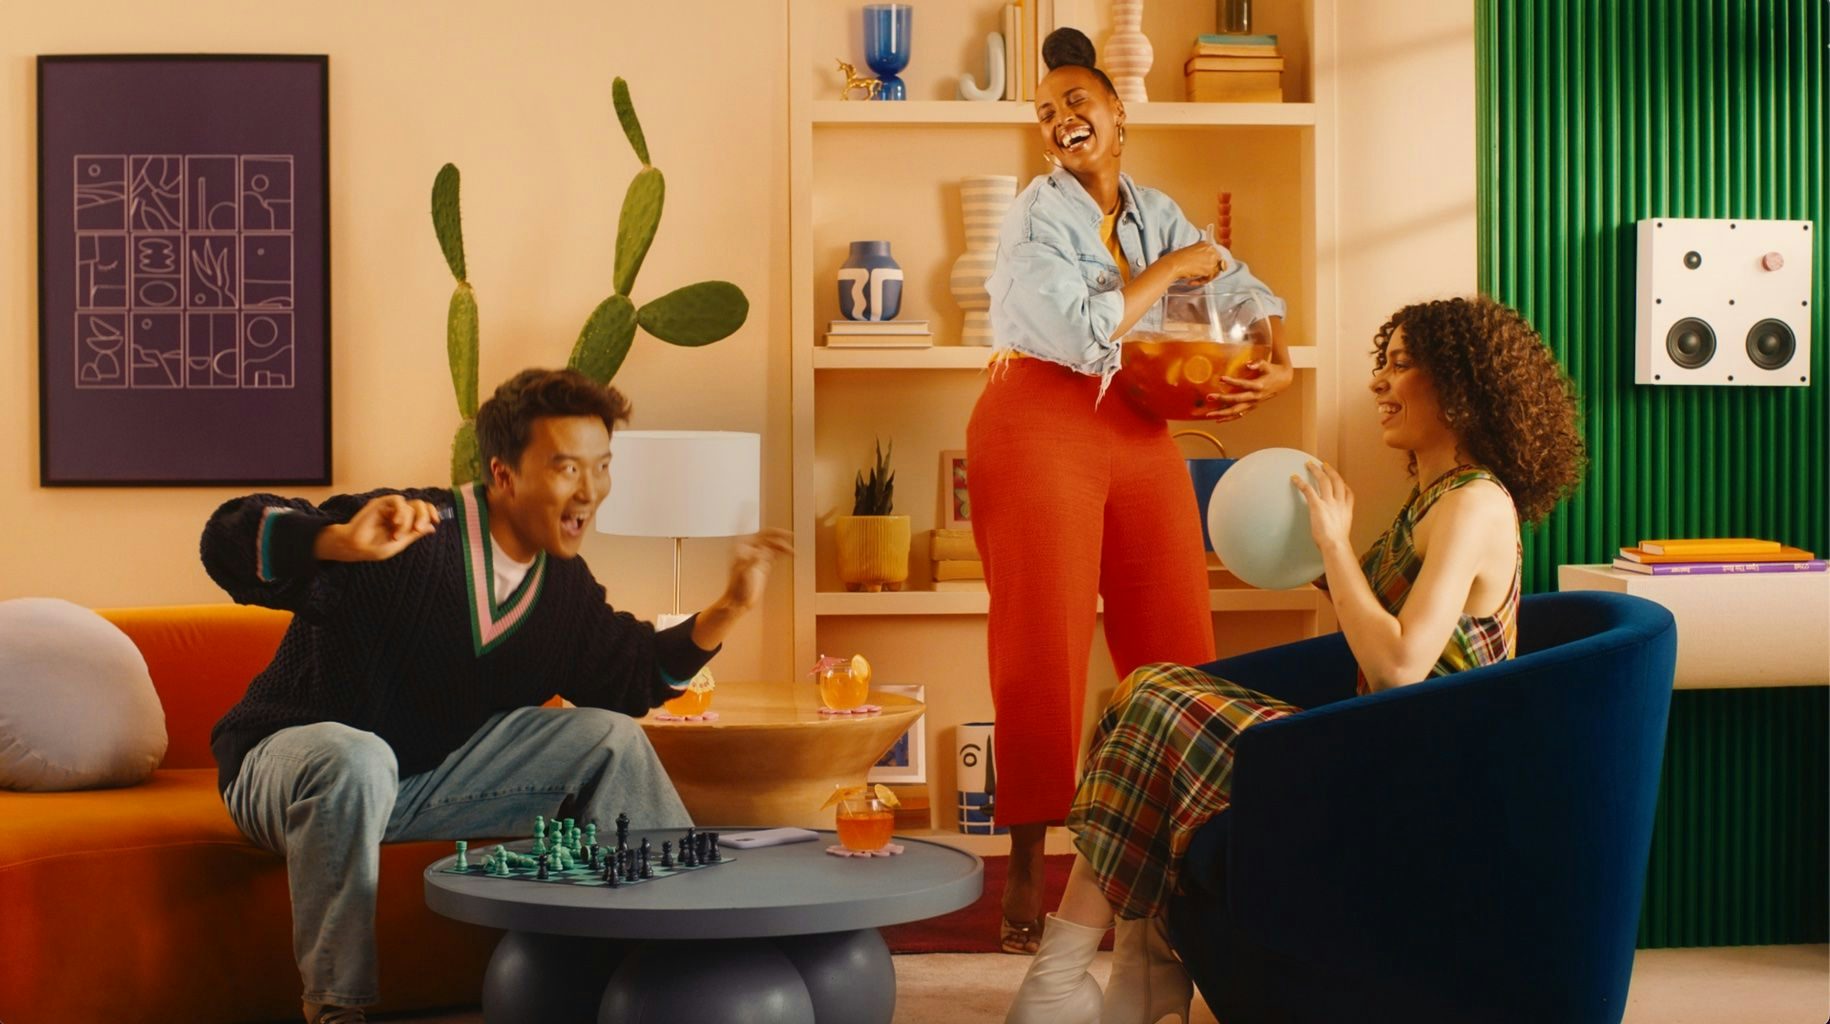 Three people in a living room, as featured in a Kijiji advertising campaign directed by Camille Boyer